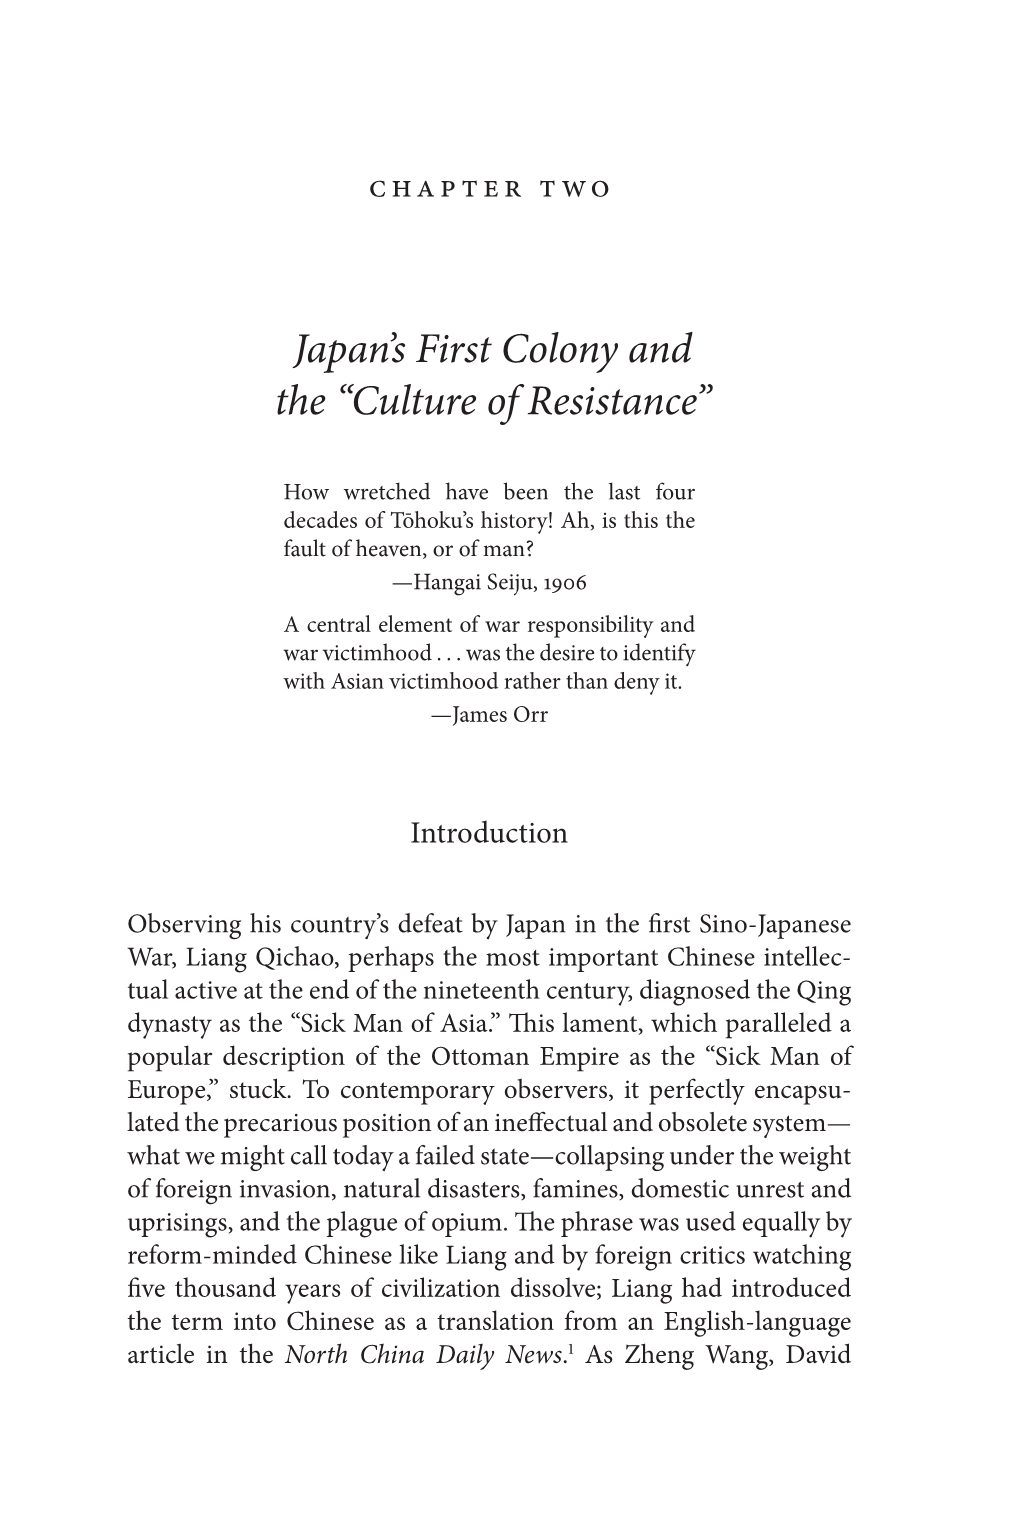 Japan's First Colony And